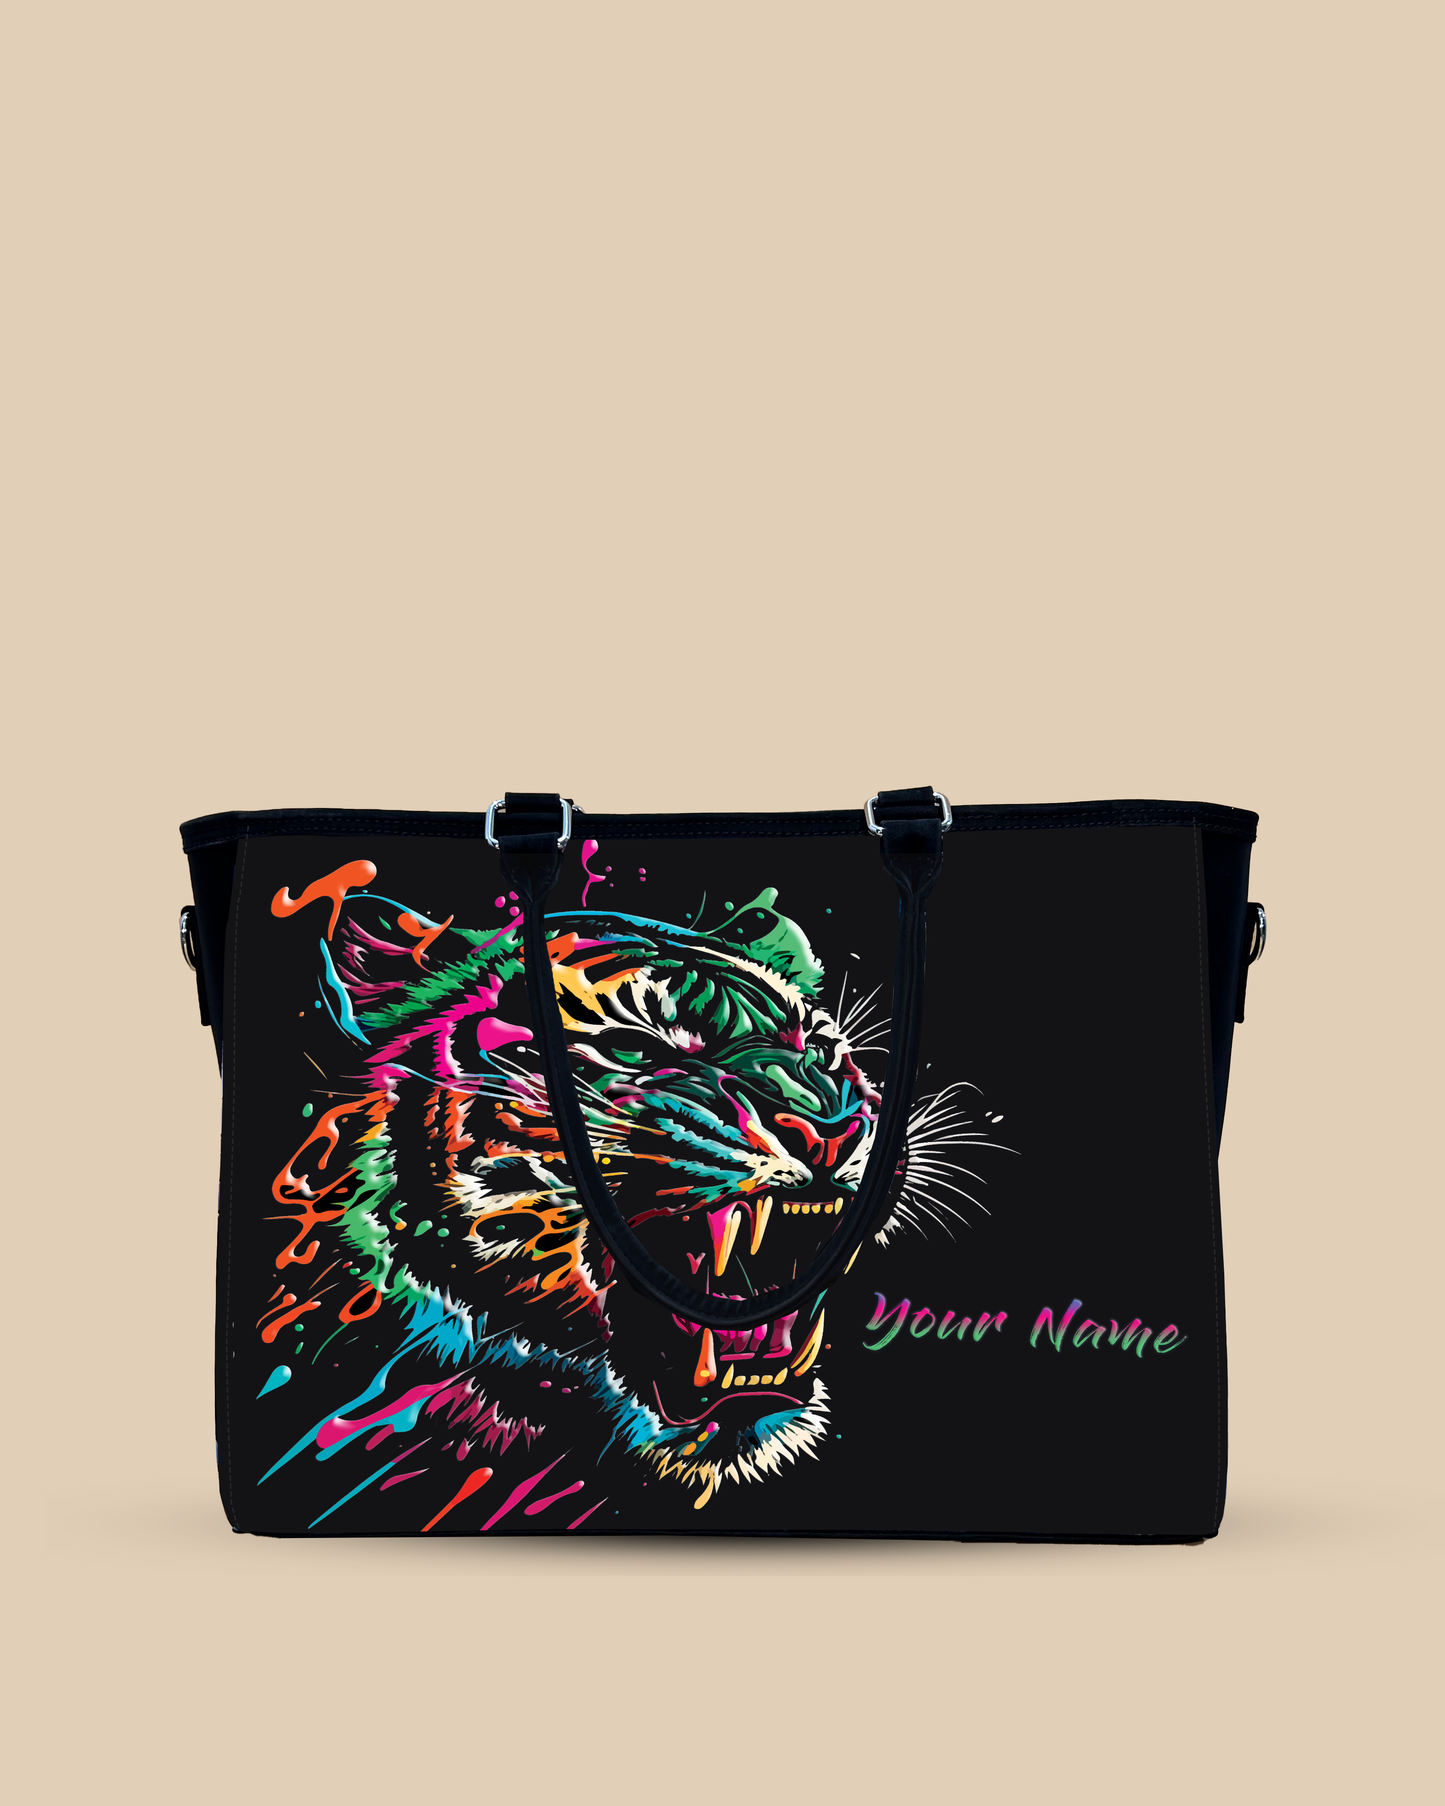 Colorful Roaring Bangal Tiger Oversized Tote